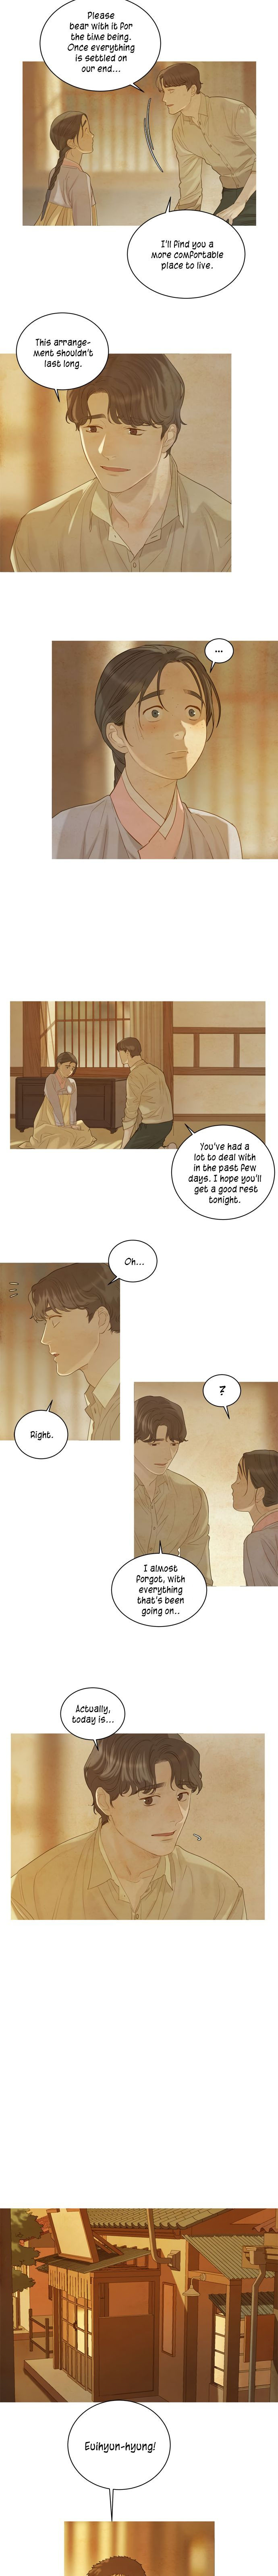 The Whale Star - The Gyeongseong Mermaid - Chapter 27 Page 4